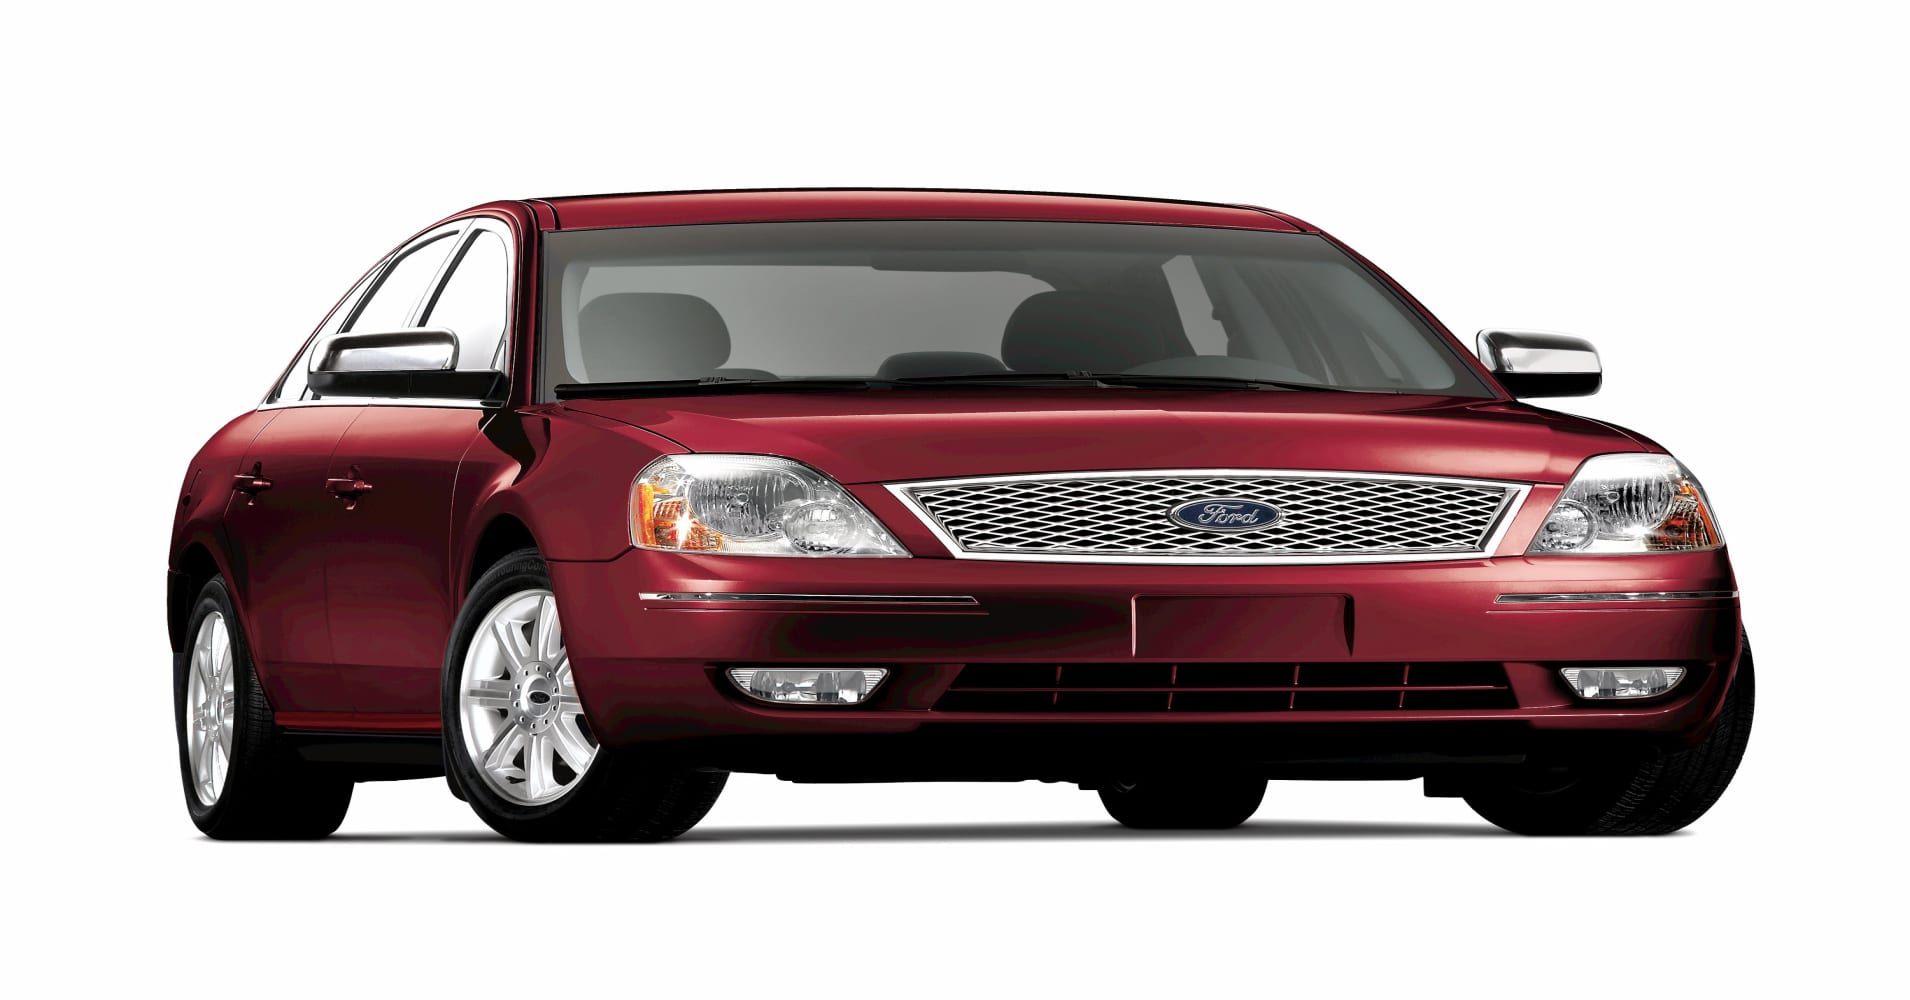 Ford to Rename Its Five Hundred Model the Taurus